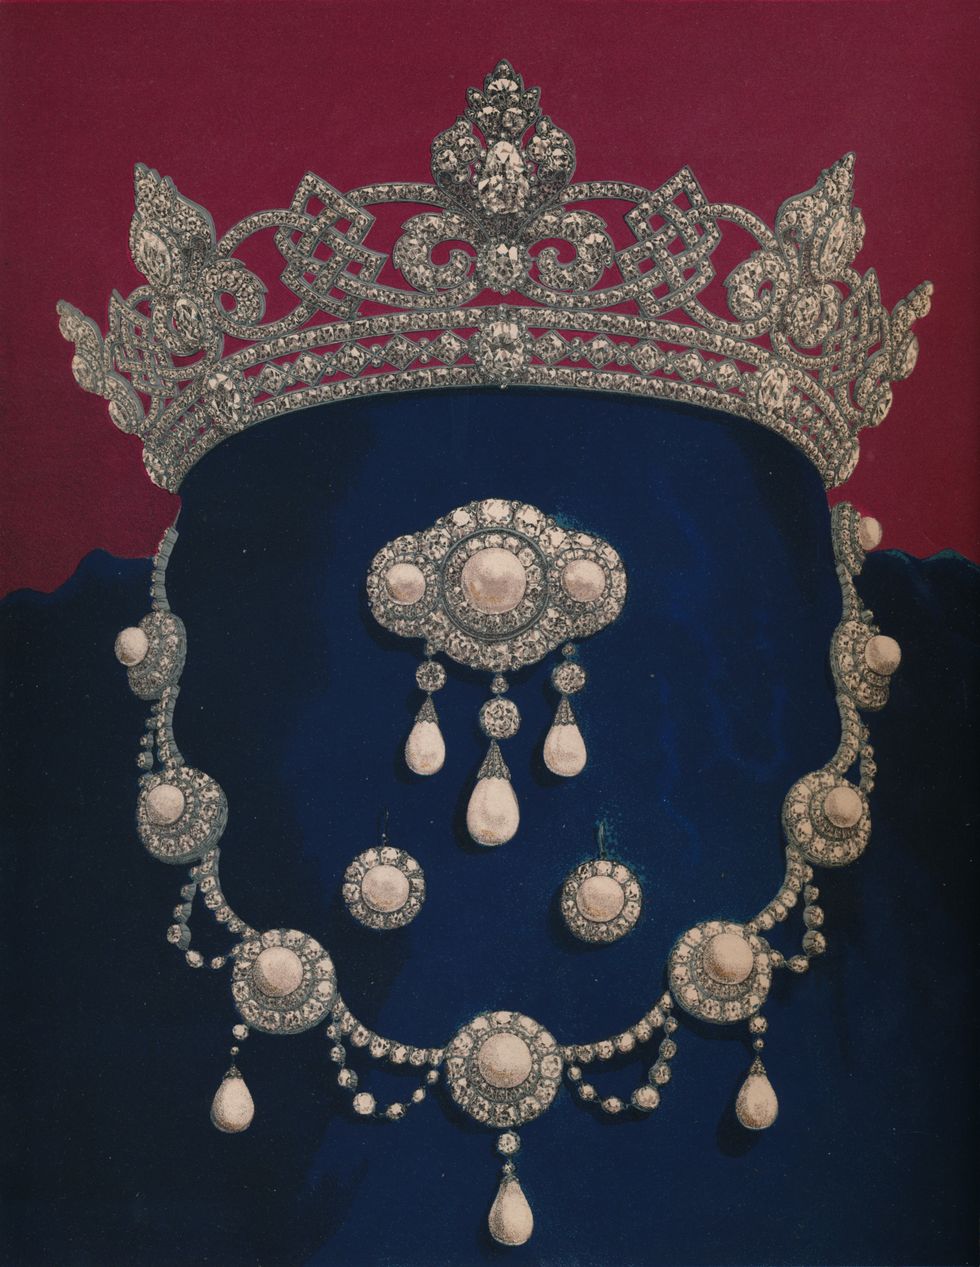 Parure Of Diamonds And Pearls - The Gift Of HRH The Prince Of Wales 1863